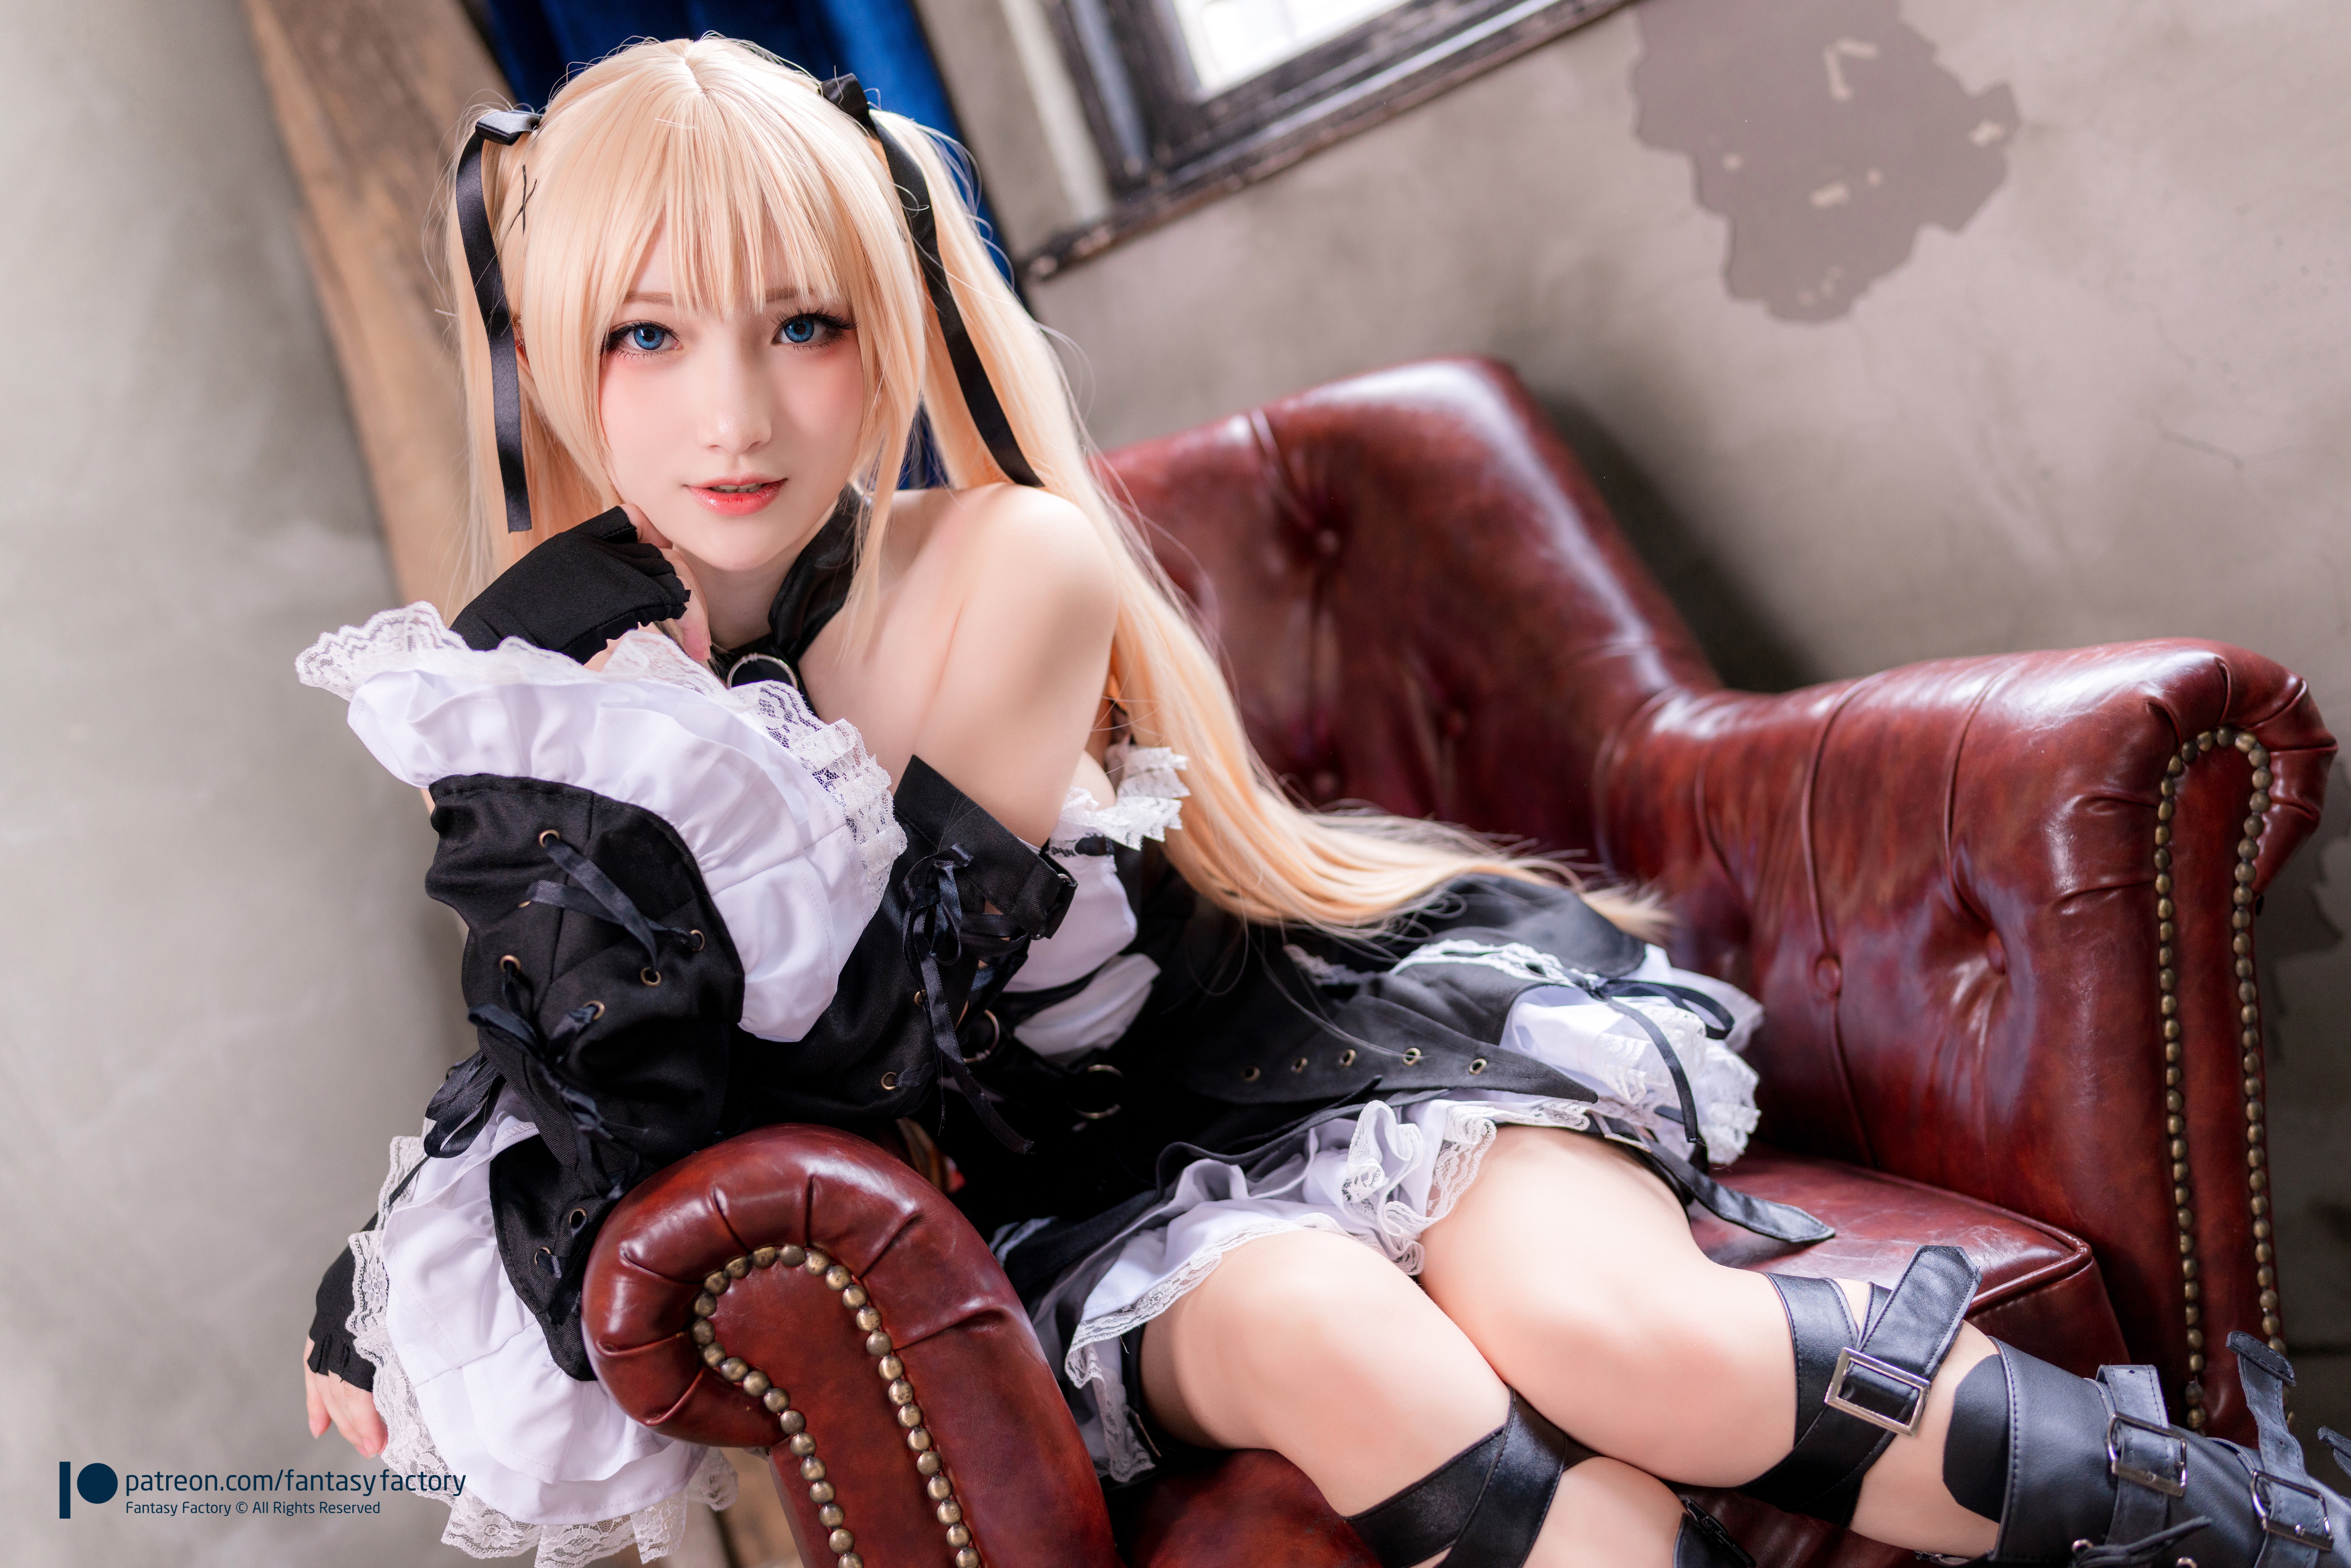 Women Model Asian Cosplay Marie Rose Dead Or Alive Video Games Video Game Girls Gothic Lolita Dress  7555x5039